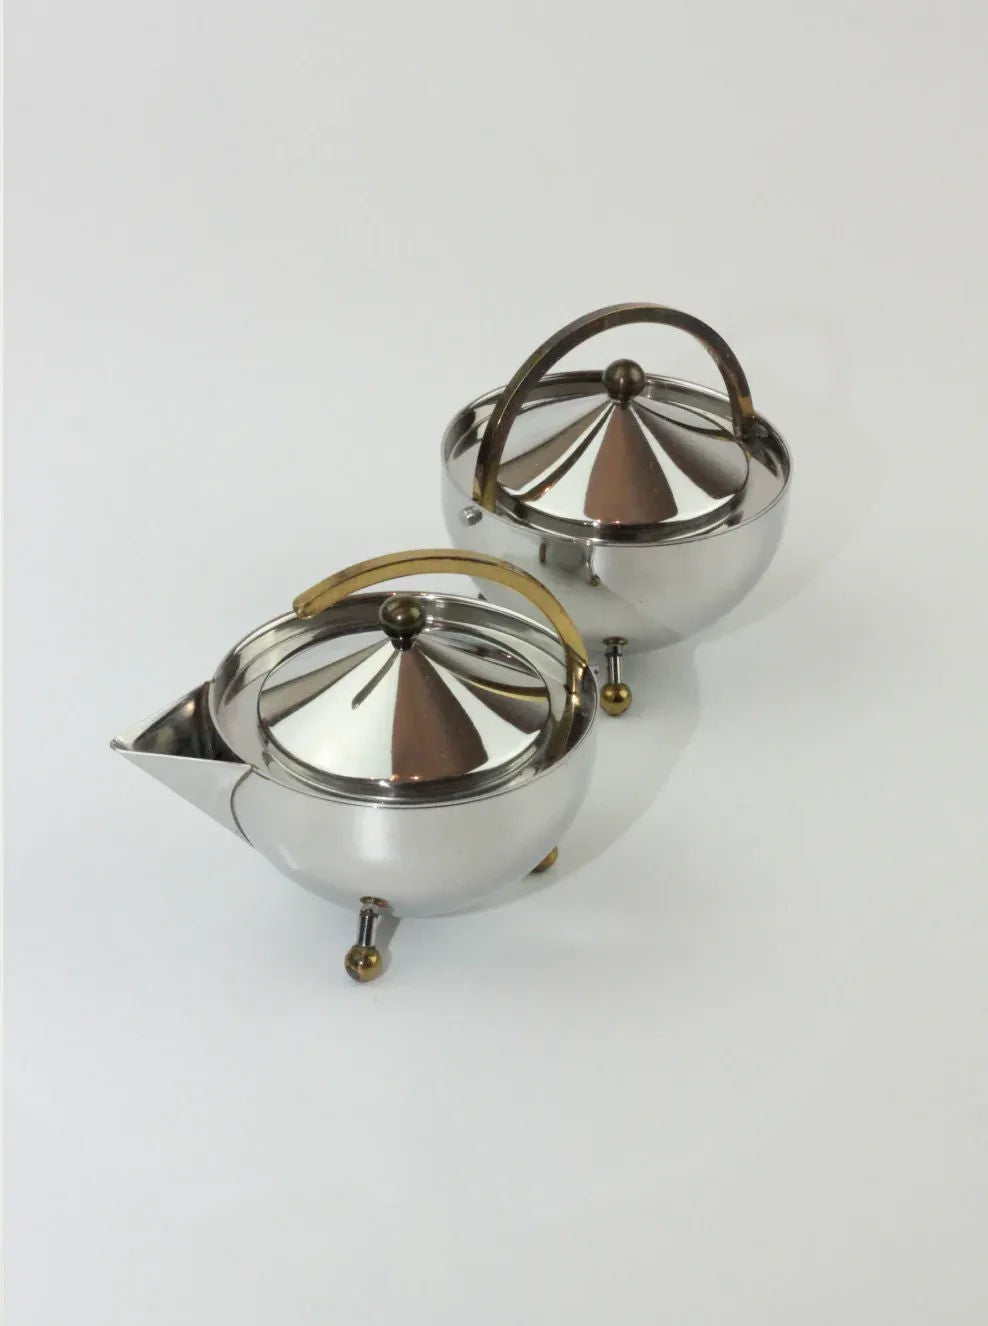 A pair of the Boga Avante Shop Danish Sugar and Creamer Set with gold and brown accents, showcasing elegant Danish design. Both have spherical bodies, narrow spouts, and arched handles. The conical lids feature a finial on top. Each item in the set stands on three small spherical legs against a plain white background.